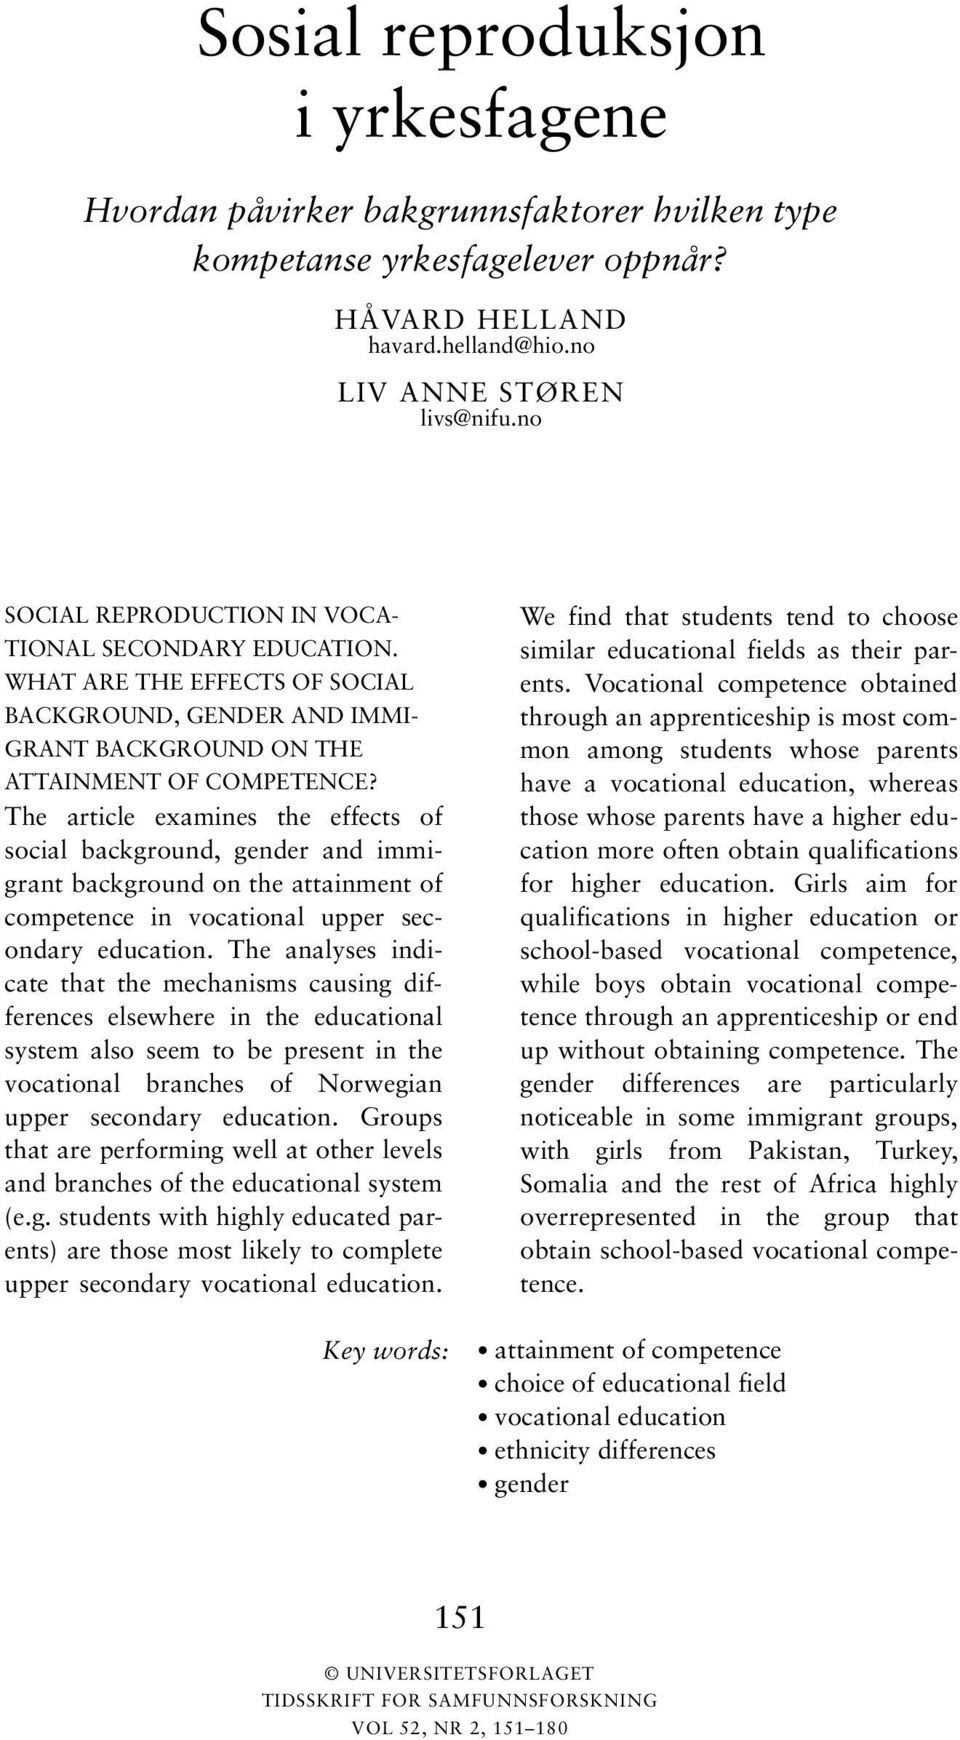 The article examines the effects of social background, gender and immigrant background on the attainment of competence in vocational upper secondary education.